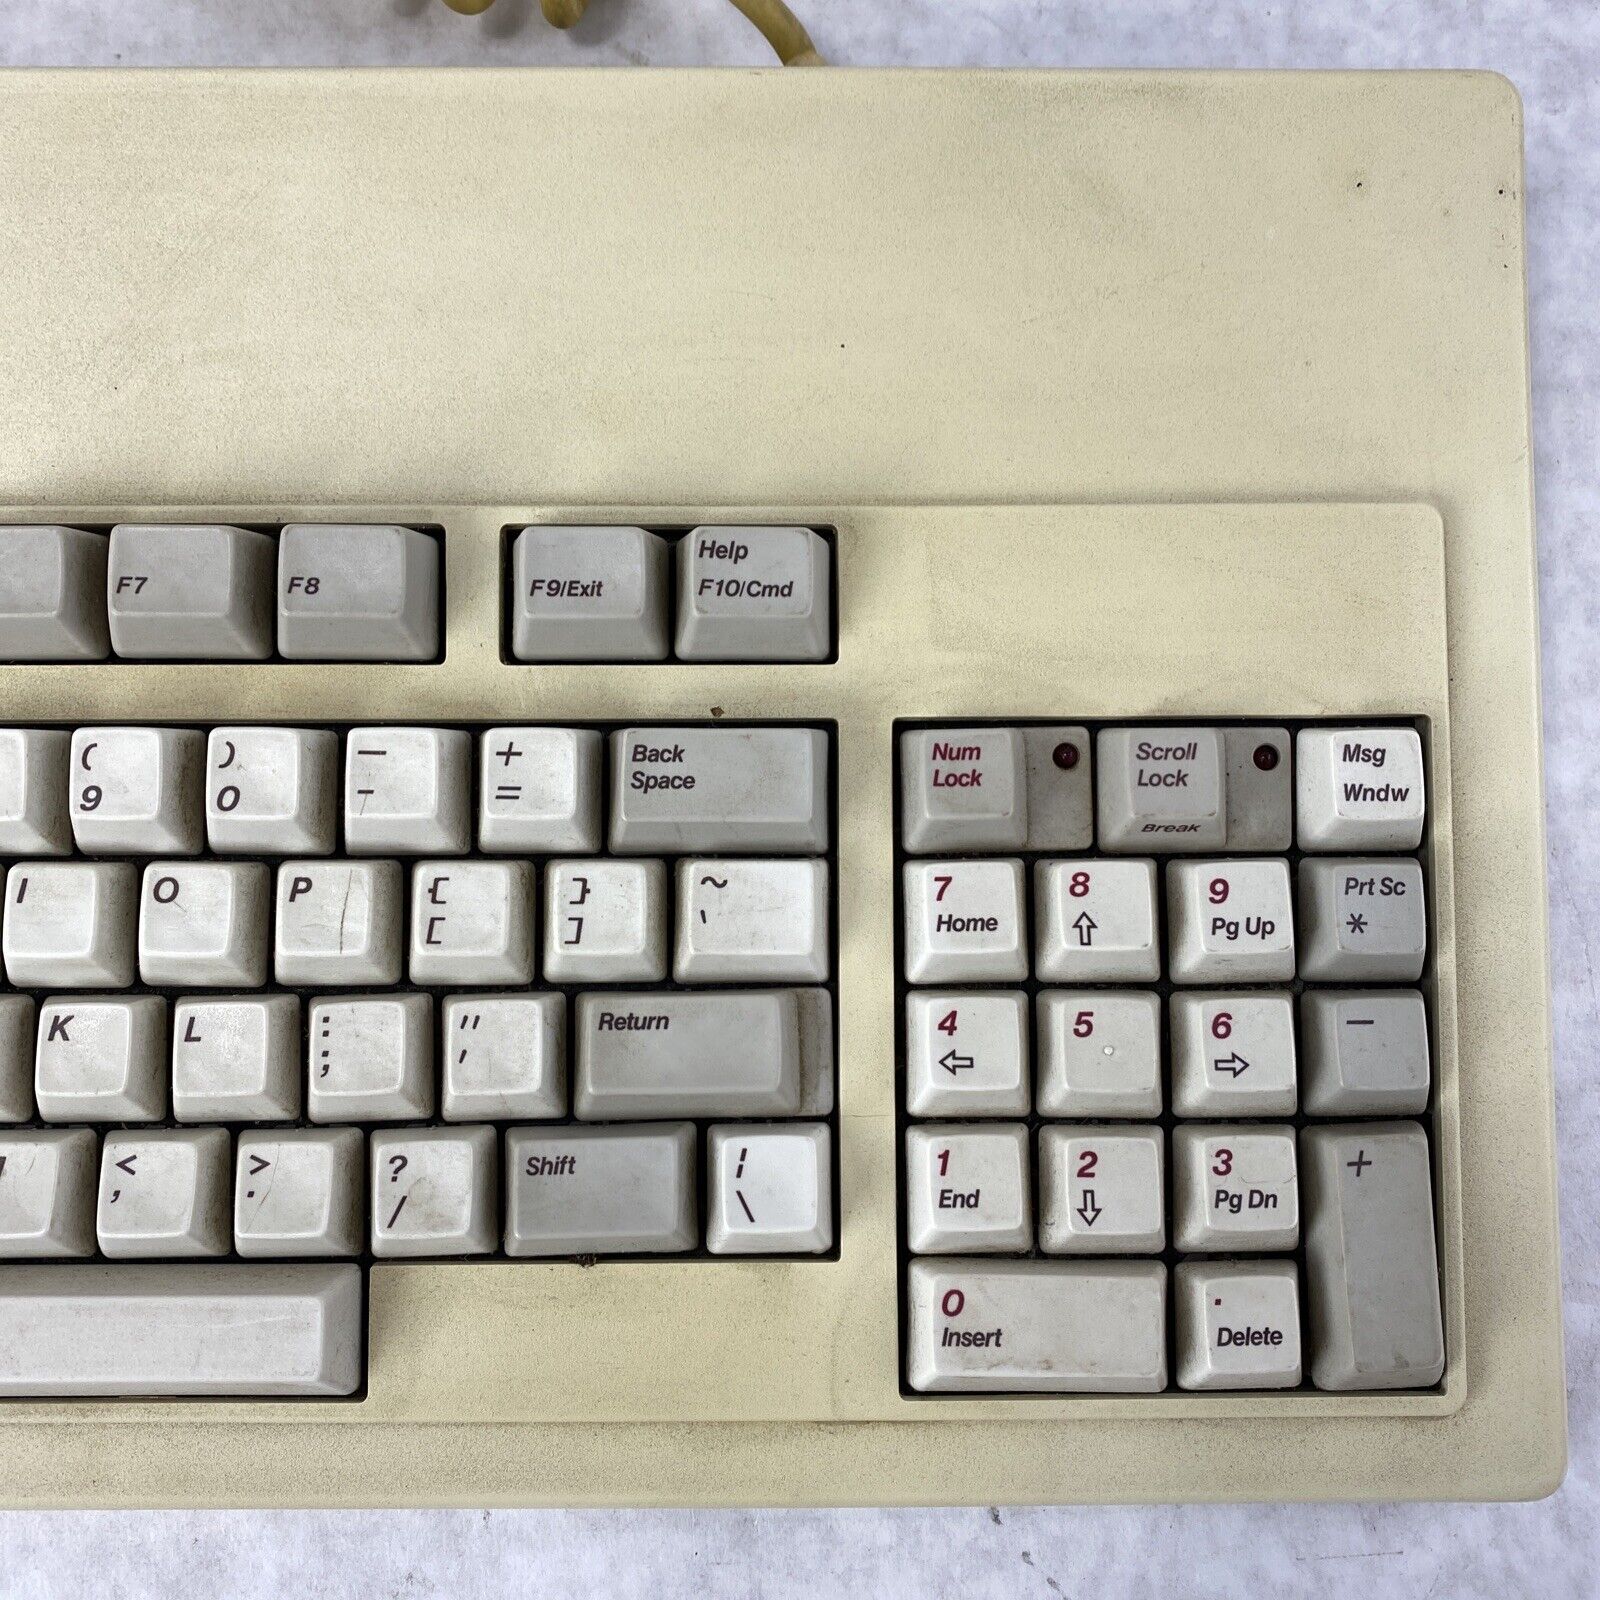 AT&T KBD 302 Mechanical Keyboard w/o [ 1 ] 5pin Vintage Made in Italy from WGS